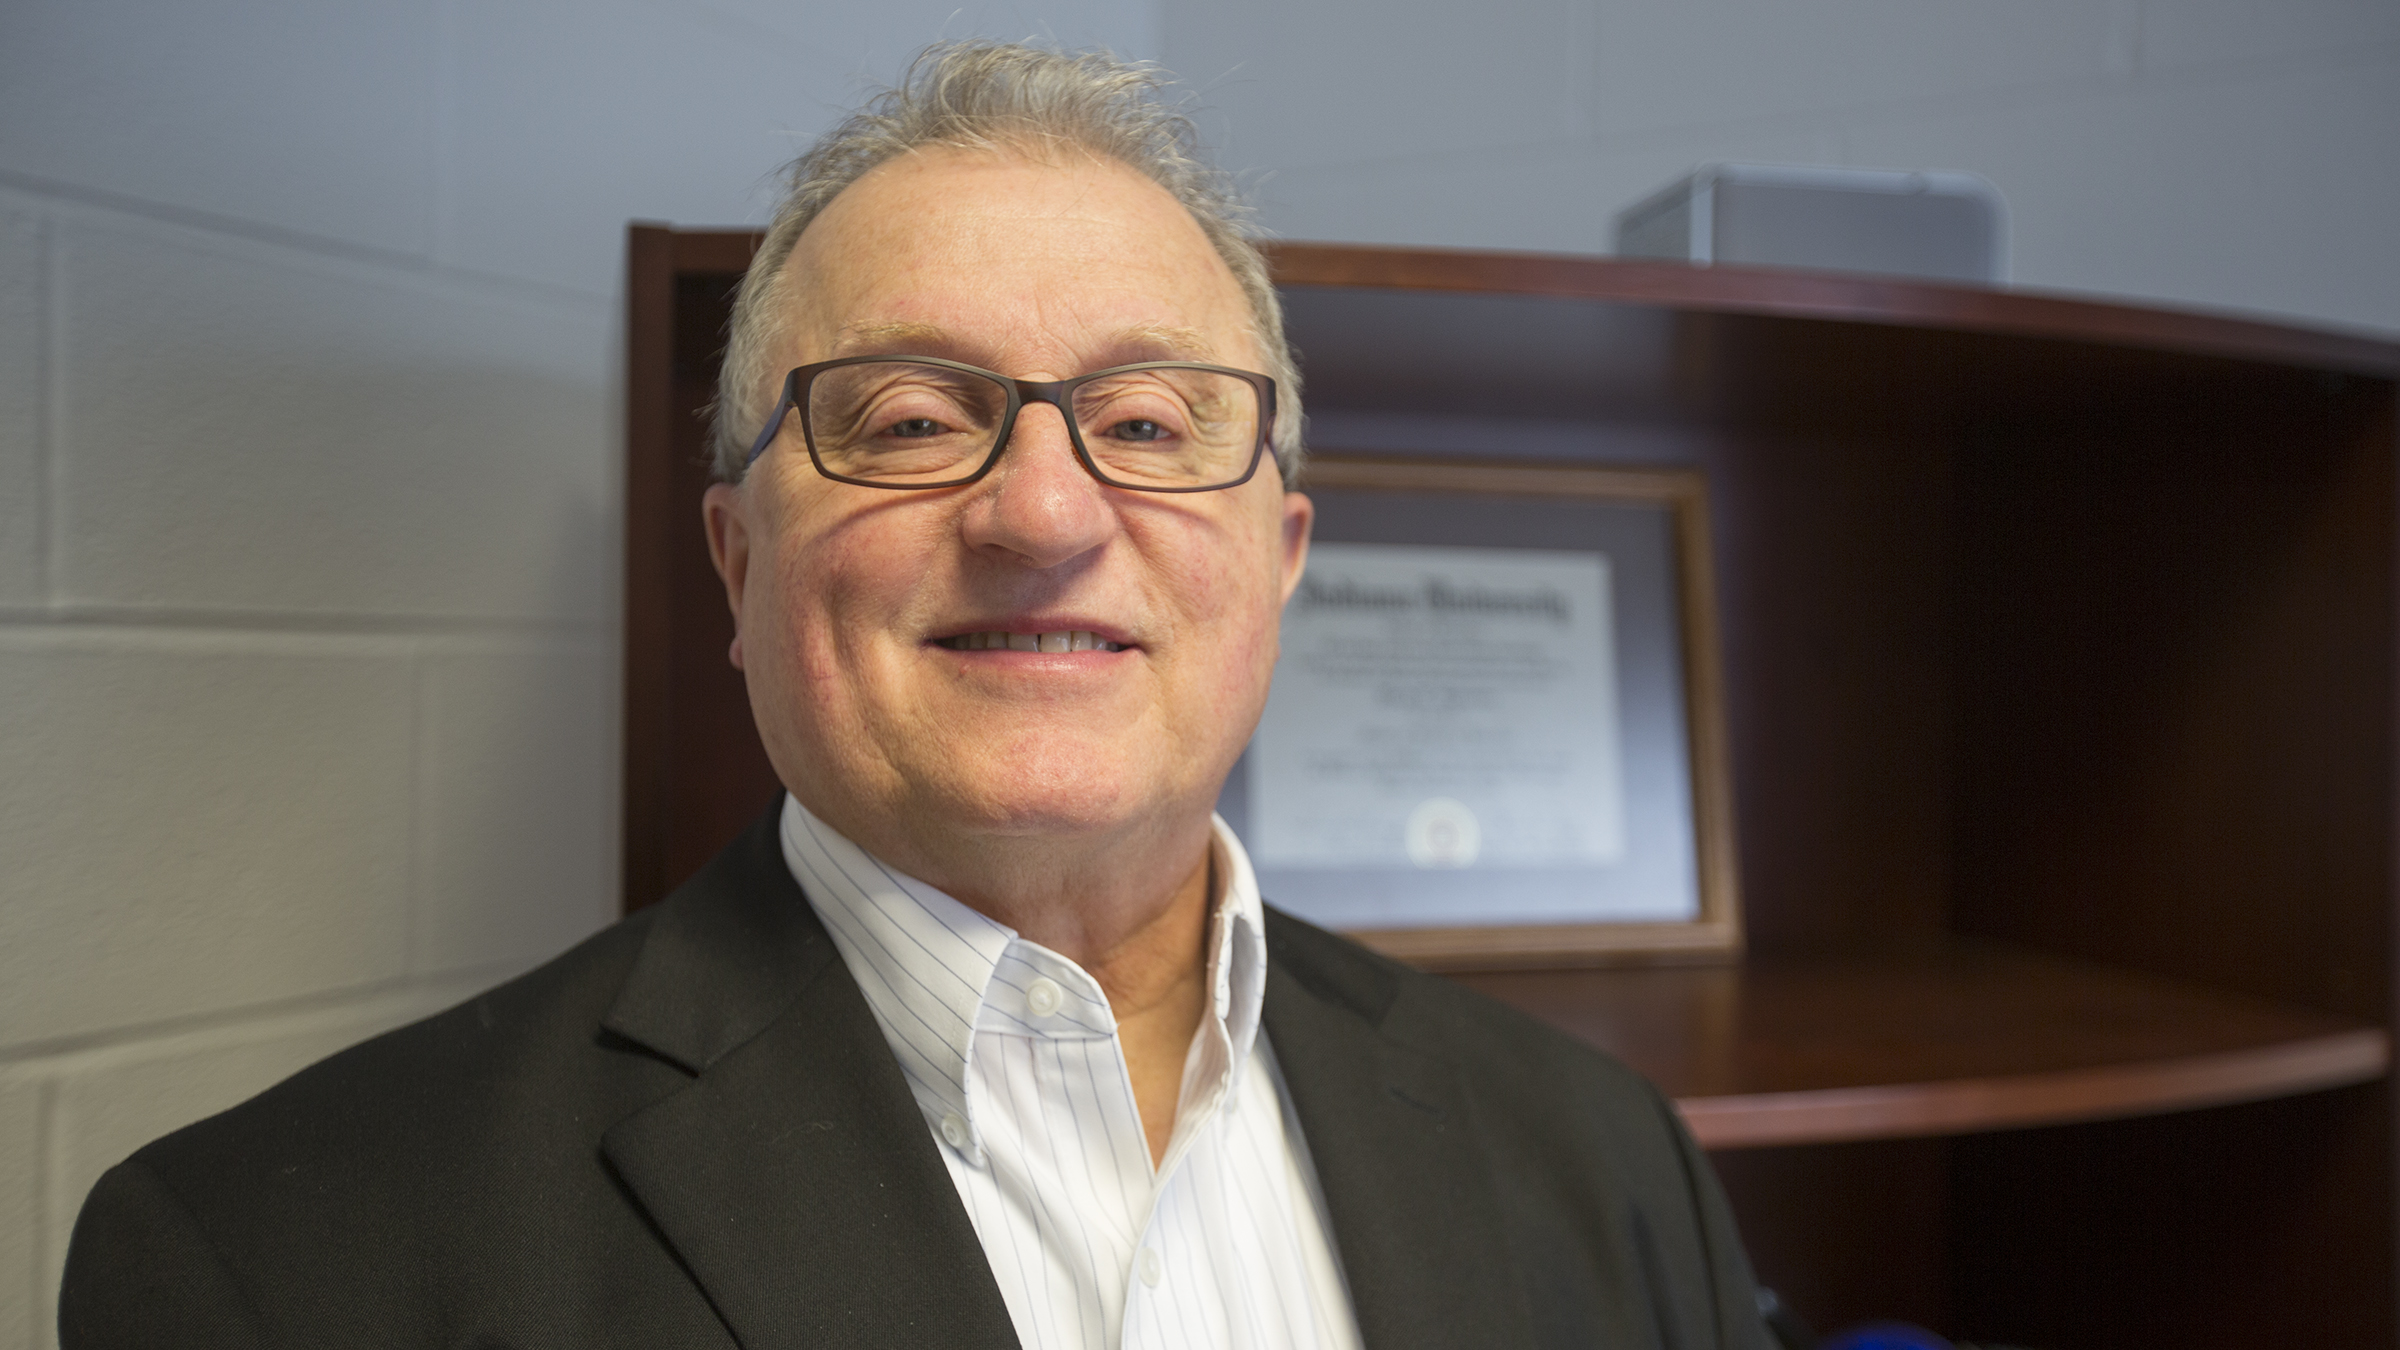 After more than 30 years providing professional counseling services, including the last 15 at the university, Nebraska's Floyd Sylvester is retiring.